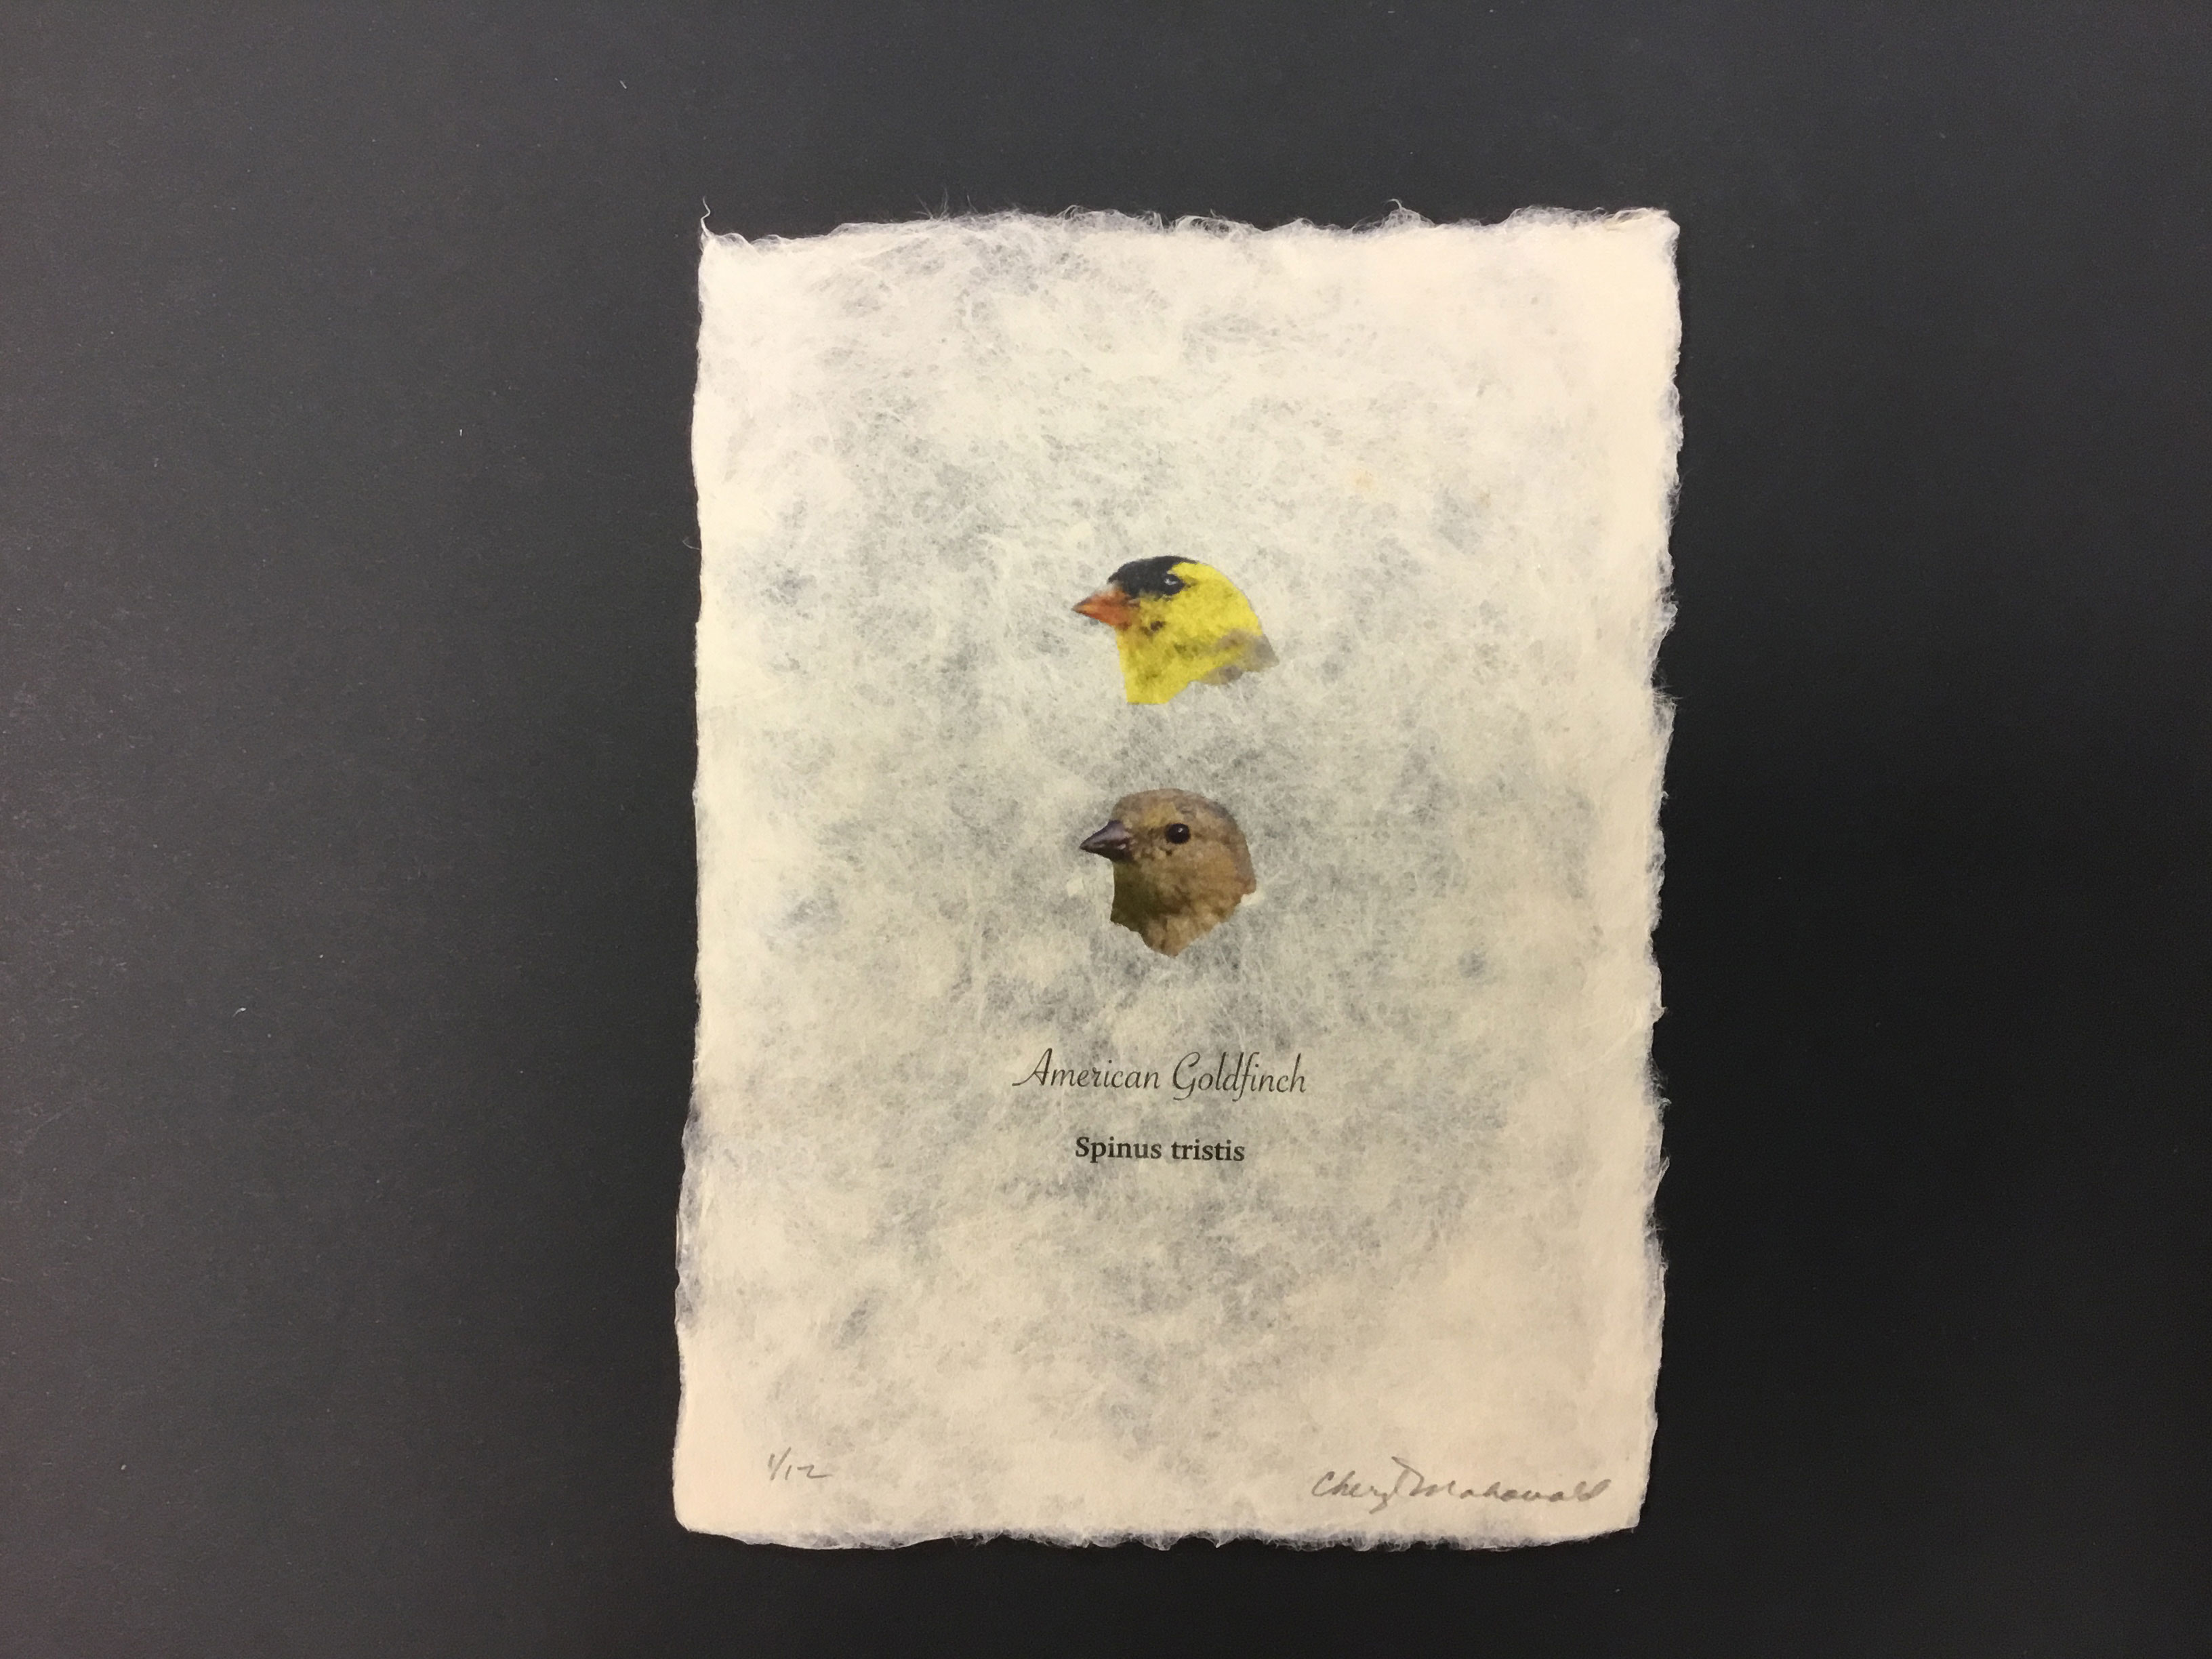 This piece, entitled “Spinus tristis”, is made from a handmade sheet of beige Philipine Gampi paper and has two American Goldfinch heads printed on it in the middle. The text on the sheet reads “American Goldfinch” and “Spinus tristis” underneath.